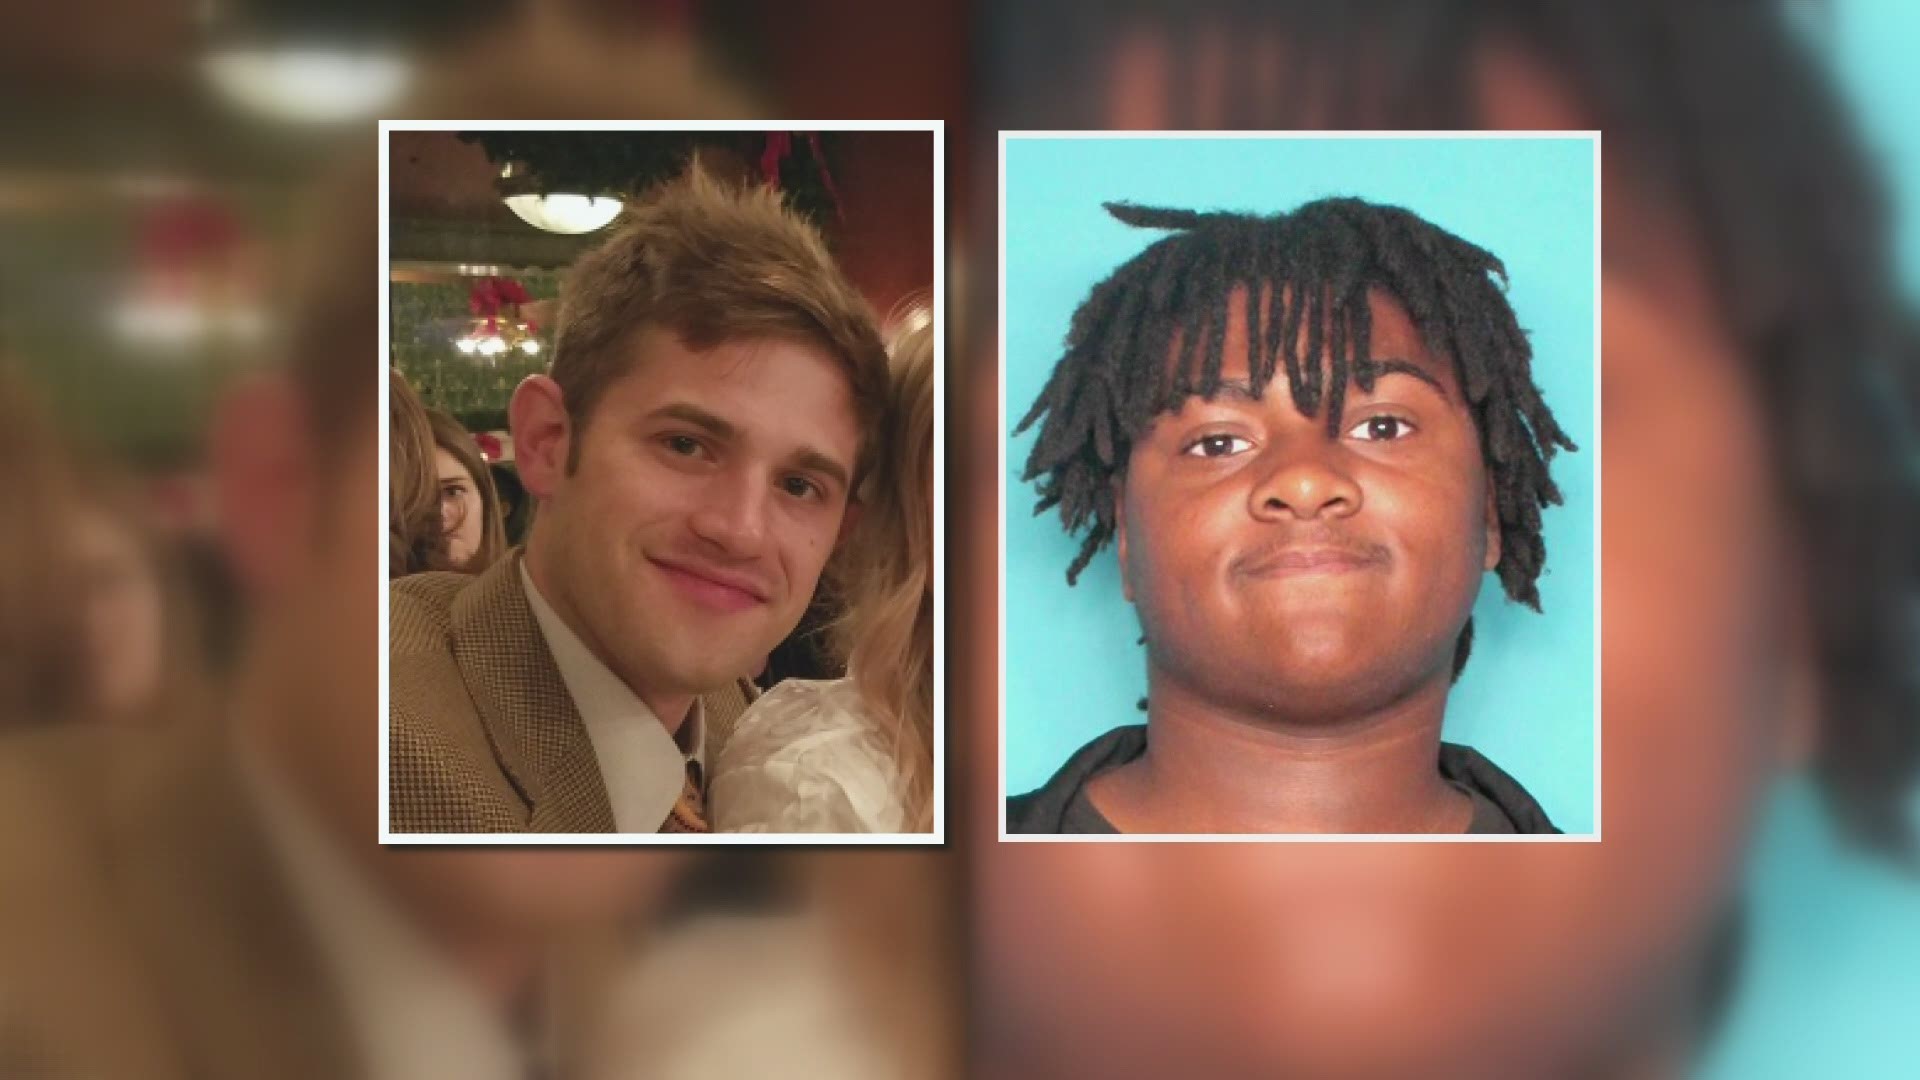 Sheriff Lopinto said Harvey admitted to the shooting and to driving Vindel's vehicle to an area in New Orleans and abandoning the vehicle with Vindel's body inside.